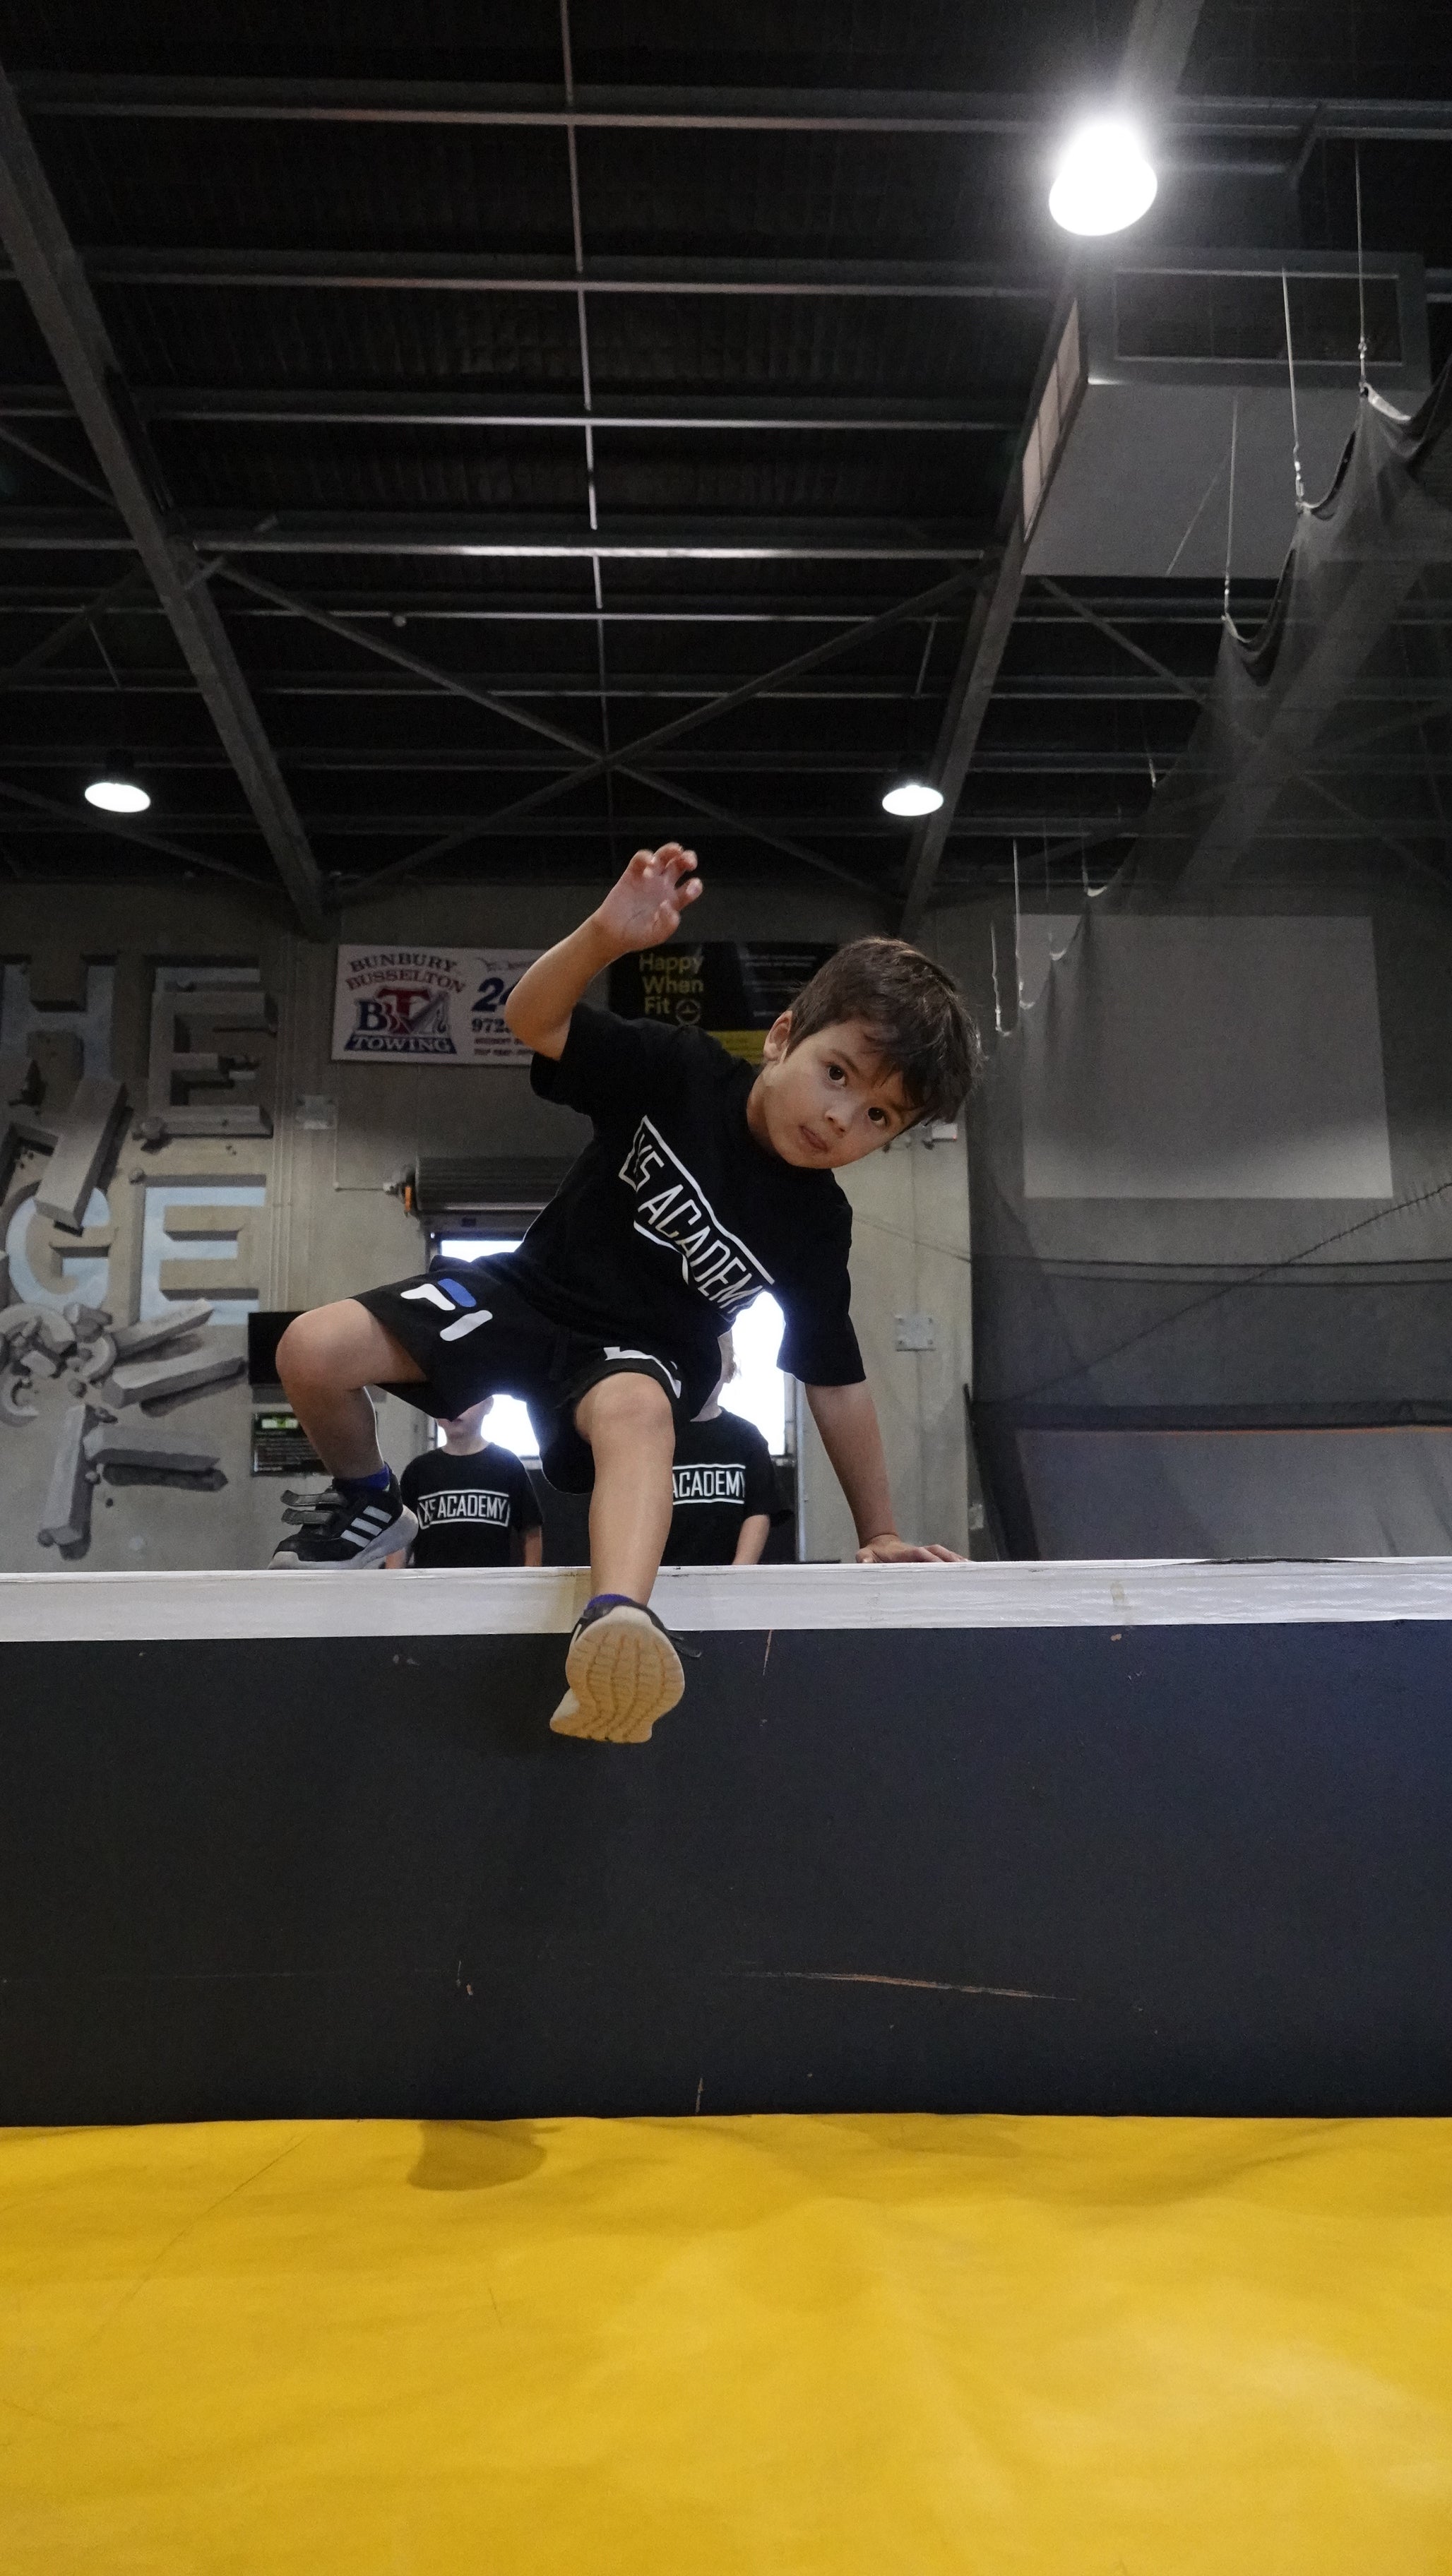 PEE-WEE PARKOUR:   . 3-4 YRS WEDNESDAY 9:00-9:30 TERM 2